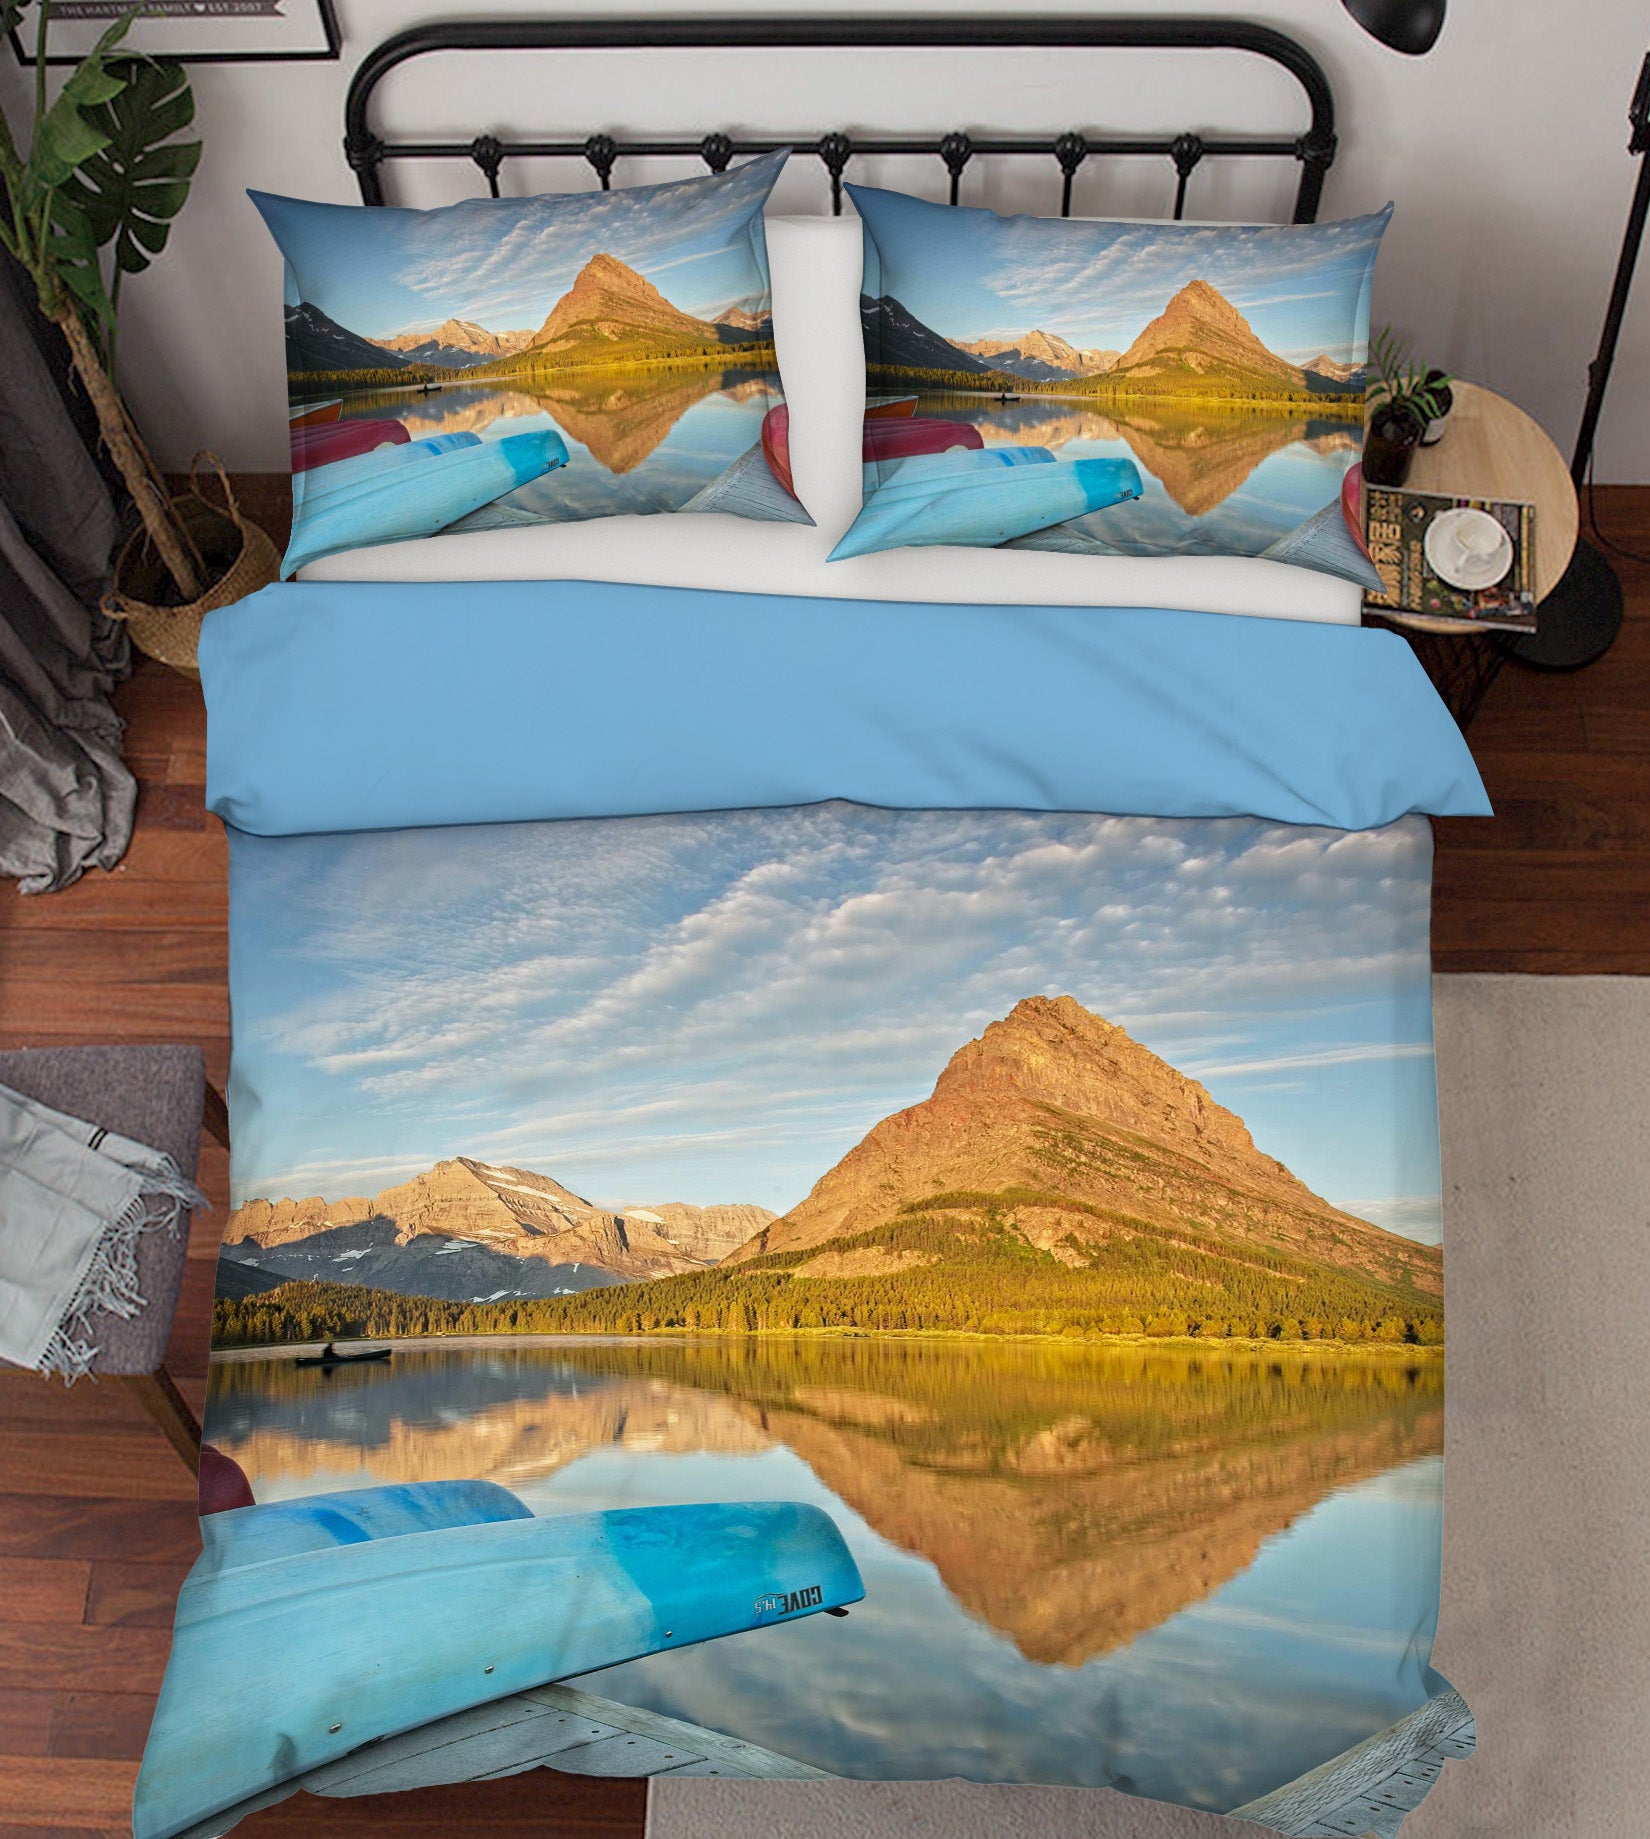 3D Waterside Mountain Peak 2133 Kathy Barefield Bedding Bed Pillowcases Quilt